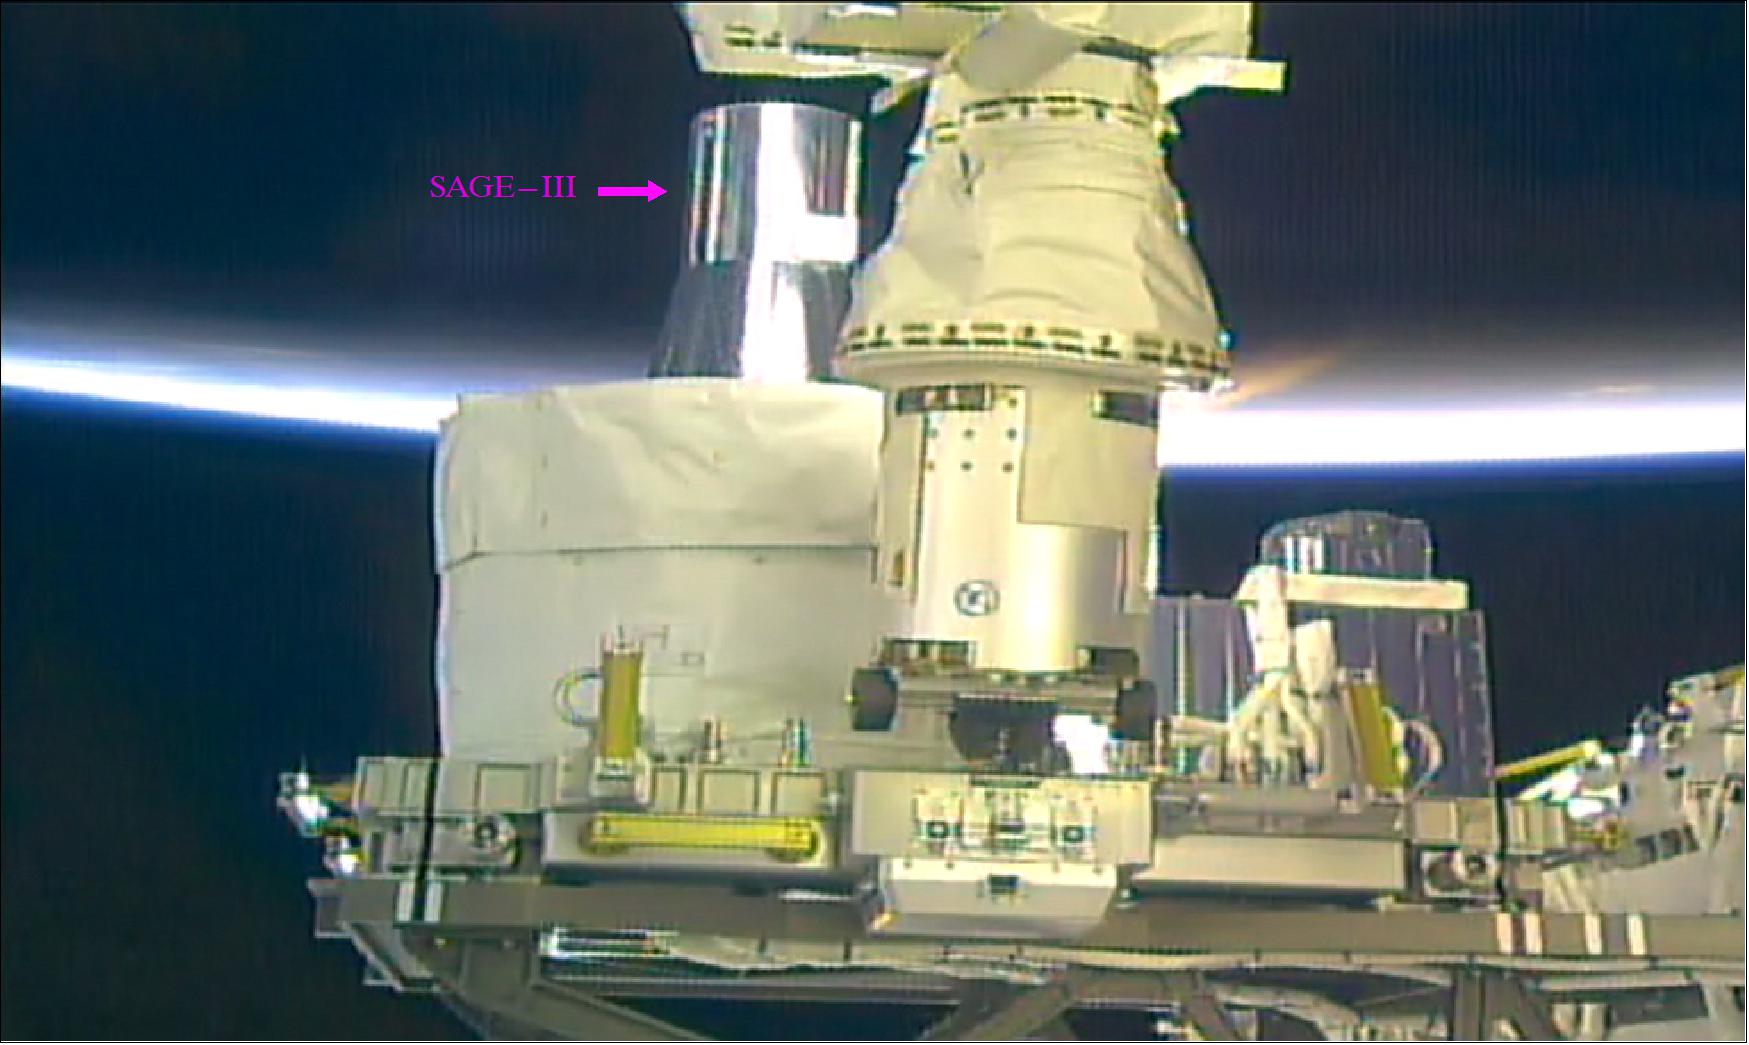 Figure 16: The SAGE-III is visible here on its new home on the International Space Station's ExPRESS Logistics Carrier platform (image credit: NASA)